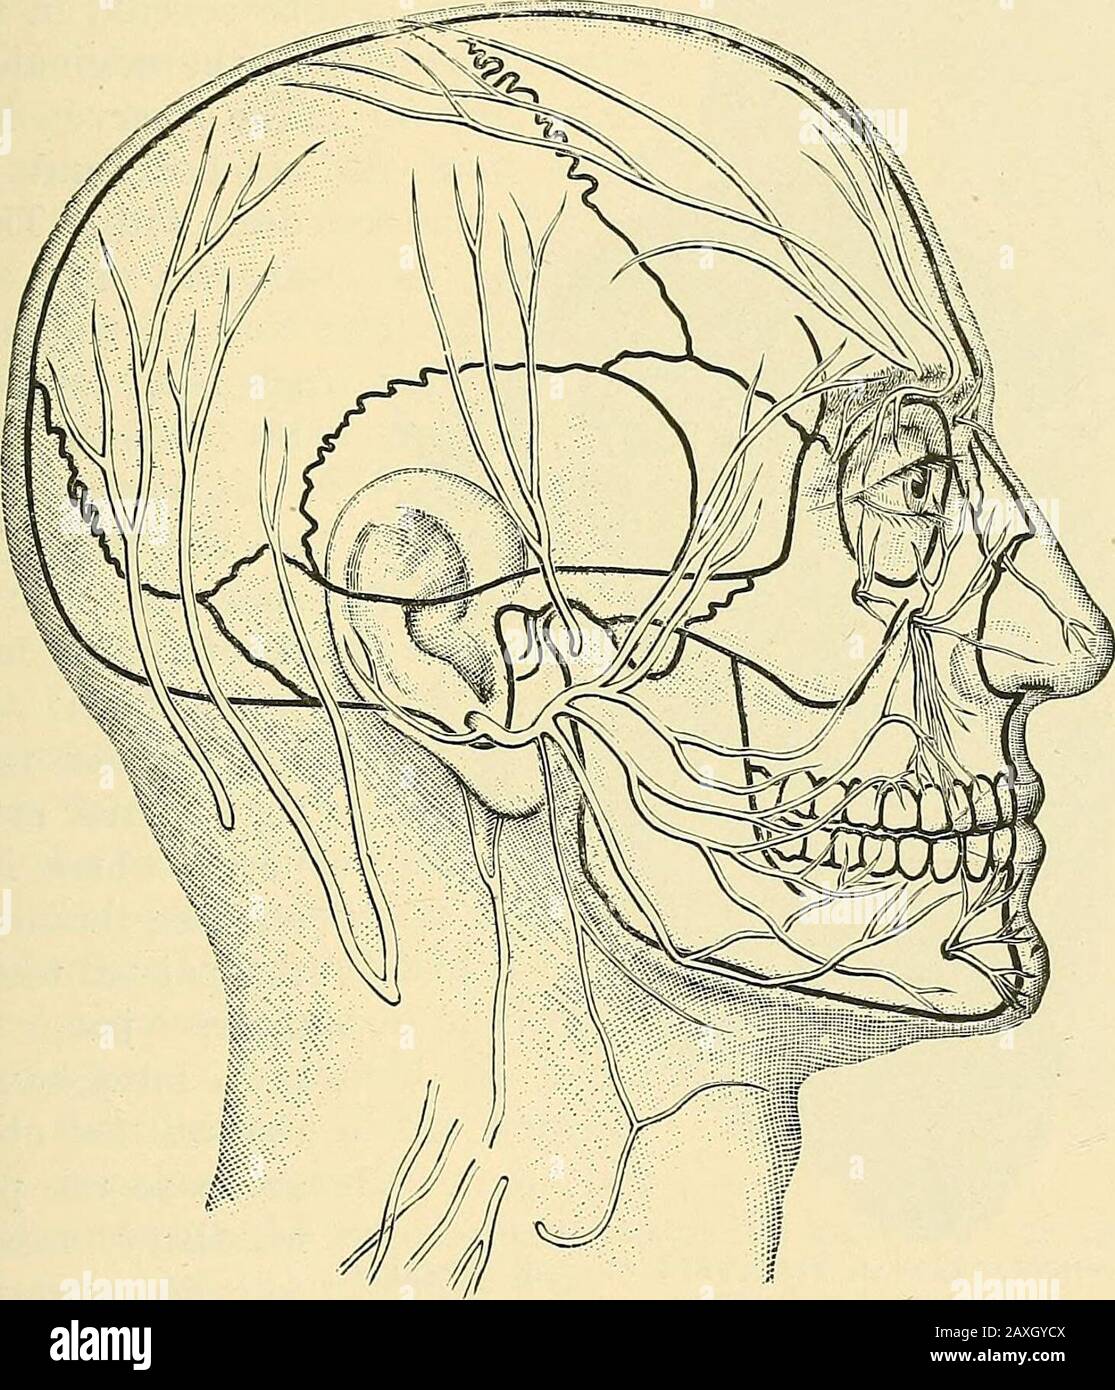 A manual of operative surgery . FIG. 226.—NERVES OF THE FACE AND THEIR RELATIONS to the arteries OF the region. (From Meckel.) chap, in] TRIFACIAL NERVE, SECOND DIVISION 89 which supplies the bicuspid and canine teeth. The incisor teeth aresupplied by the anterior dental nerve, which arises at the anterior partof the canal close to the infra-orbital foramen. In order, therefore, that all the dental nerves may be severed,the nerve trunk must be divided as far back as Meckels ganglion. The posterior half of the infra-orbital canal is open to the orbit,and exists as a groove merely ; the anterior Stock Photo